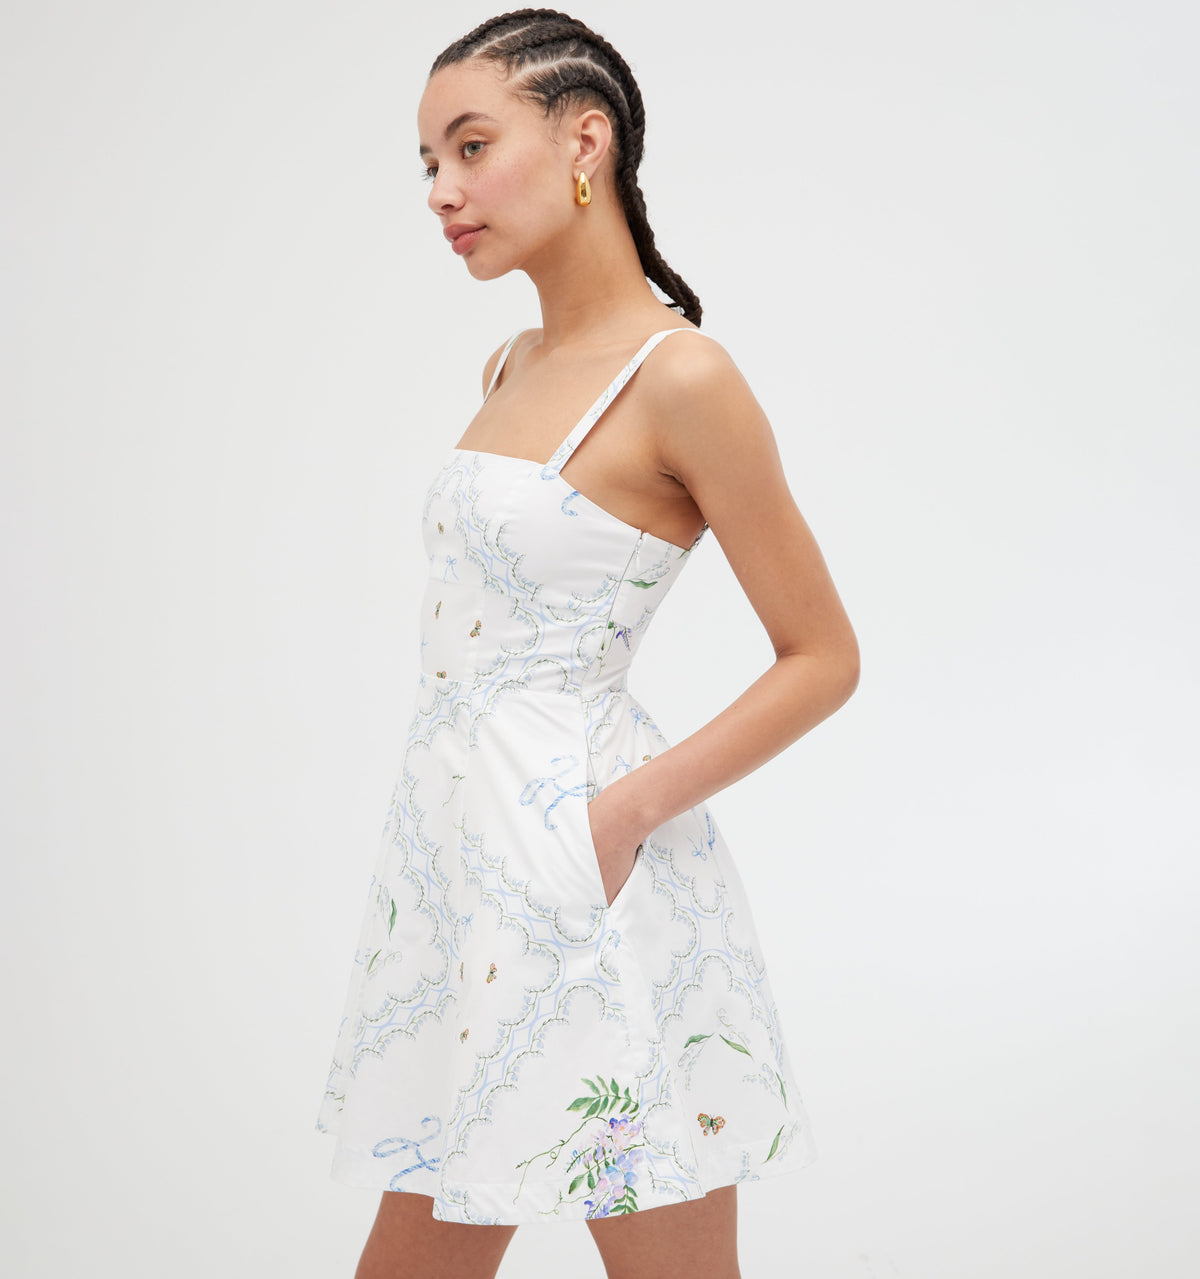 The Margot Mini Dress in White Floral Patchwork